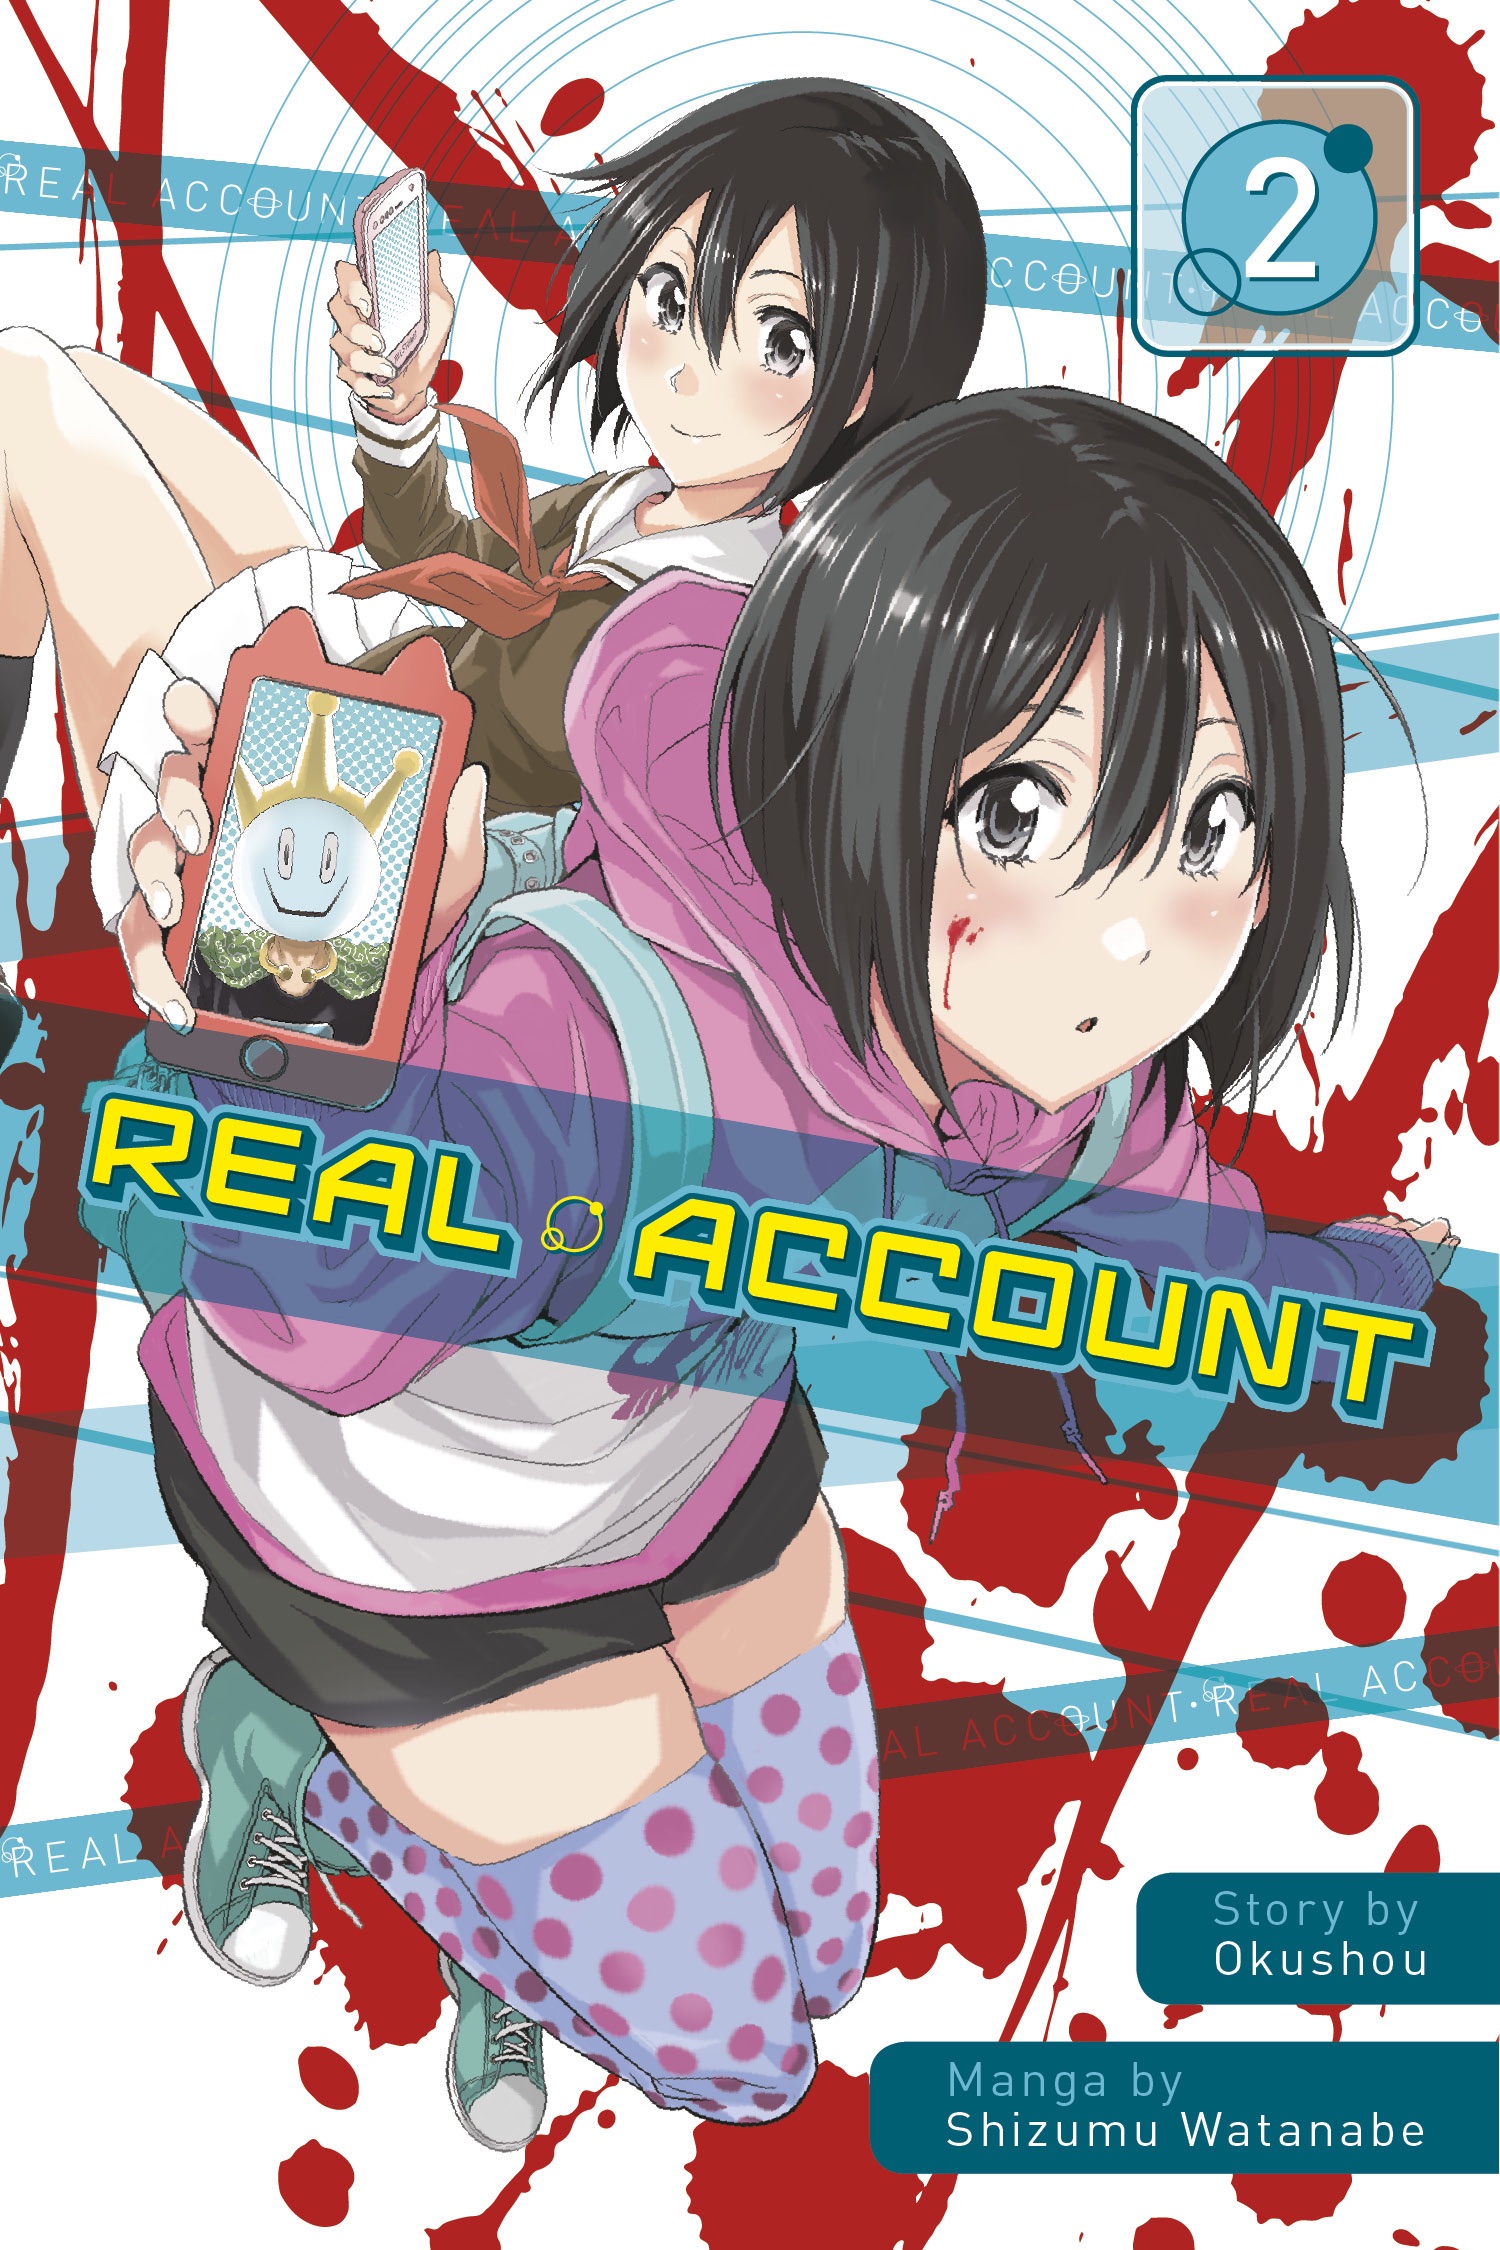 Real Account Vol. 2 Review